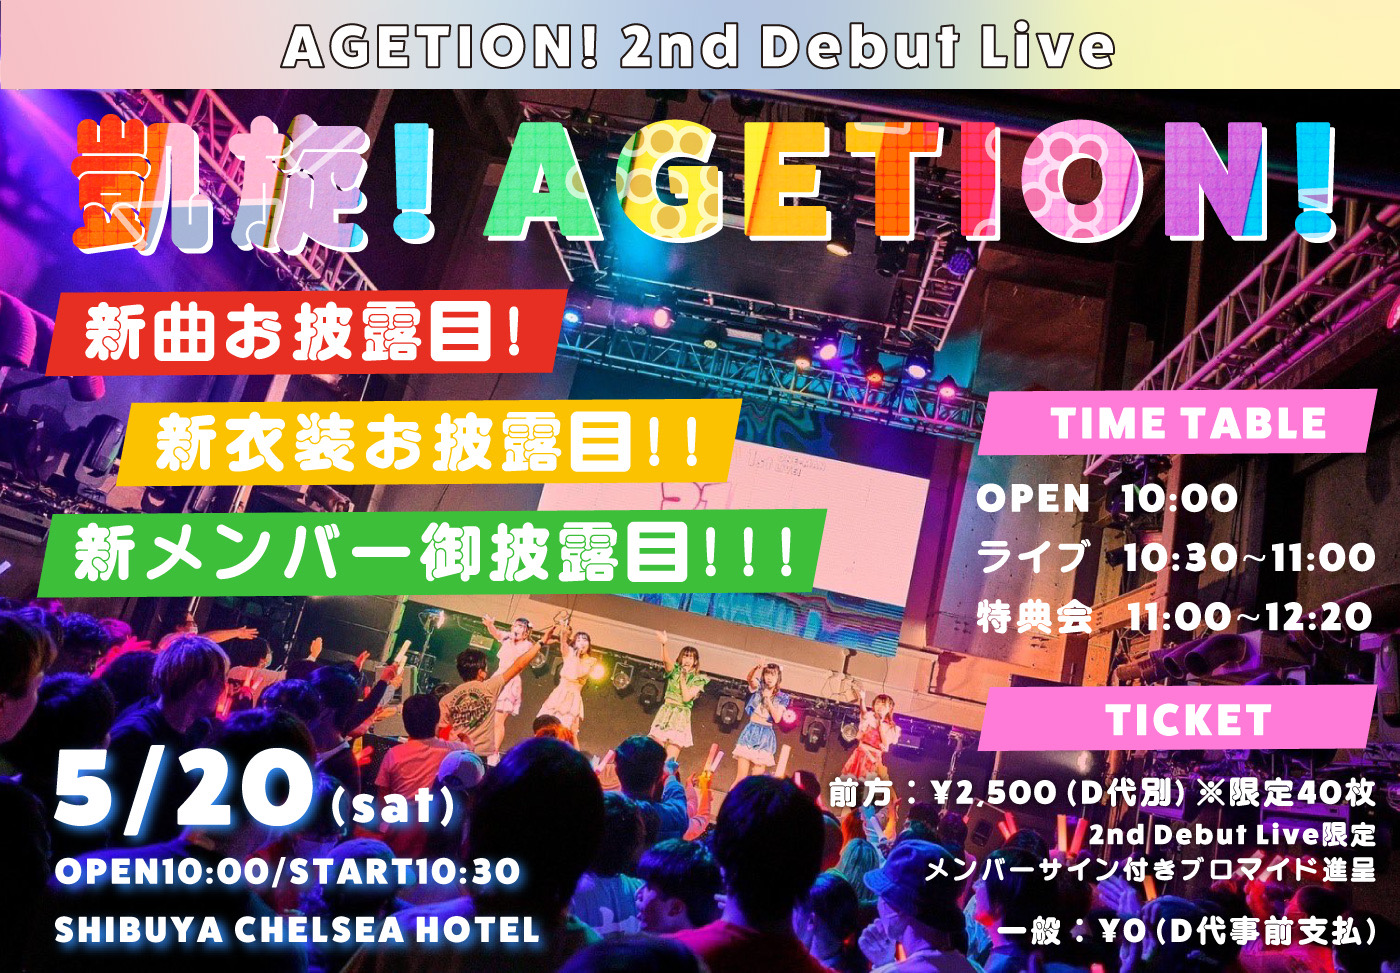 AGETION! 2nd Debut Live 凱旋！AGETION!のチケット情報・予約・購入